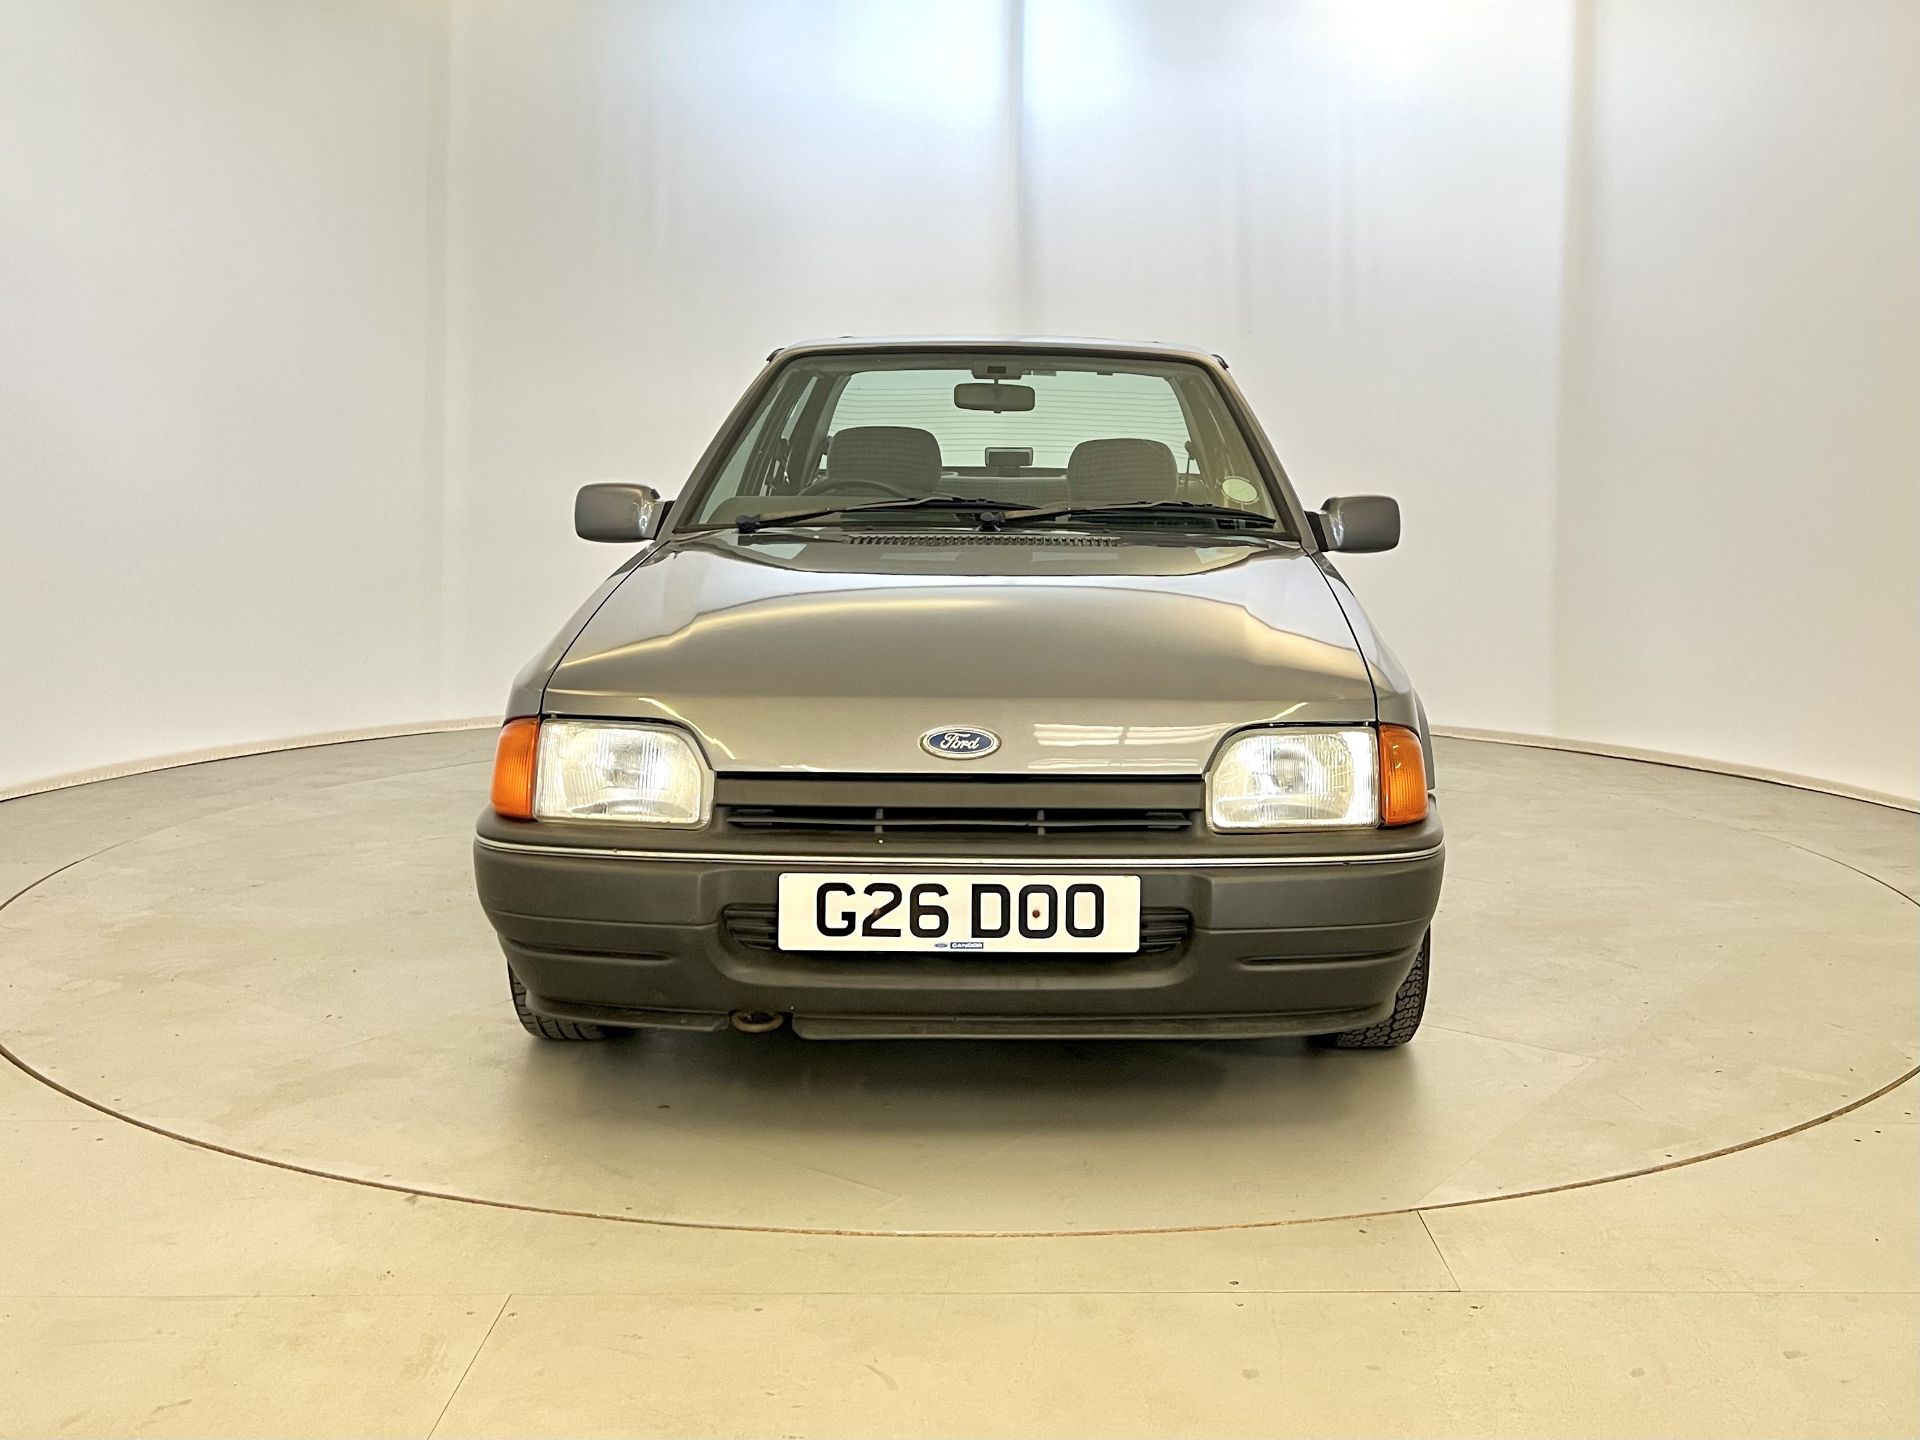 Ford Orion DX - Image 2 of 34